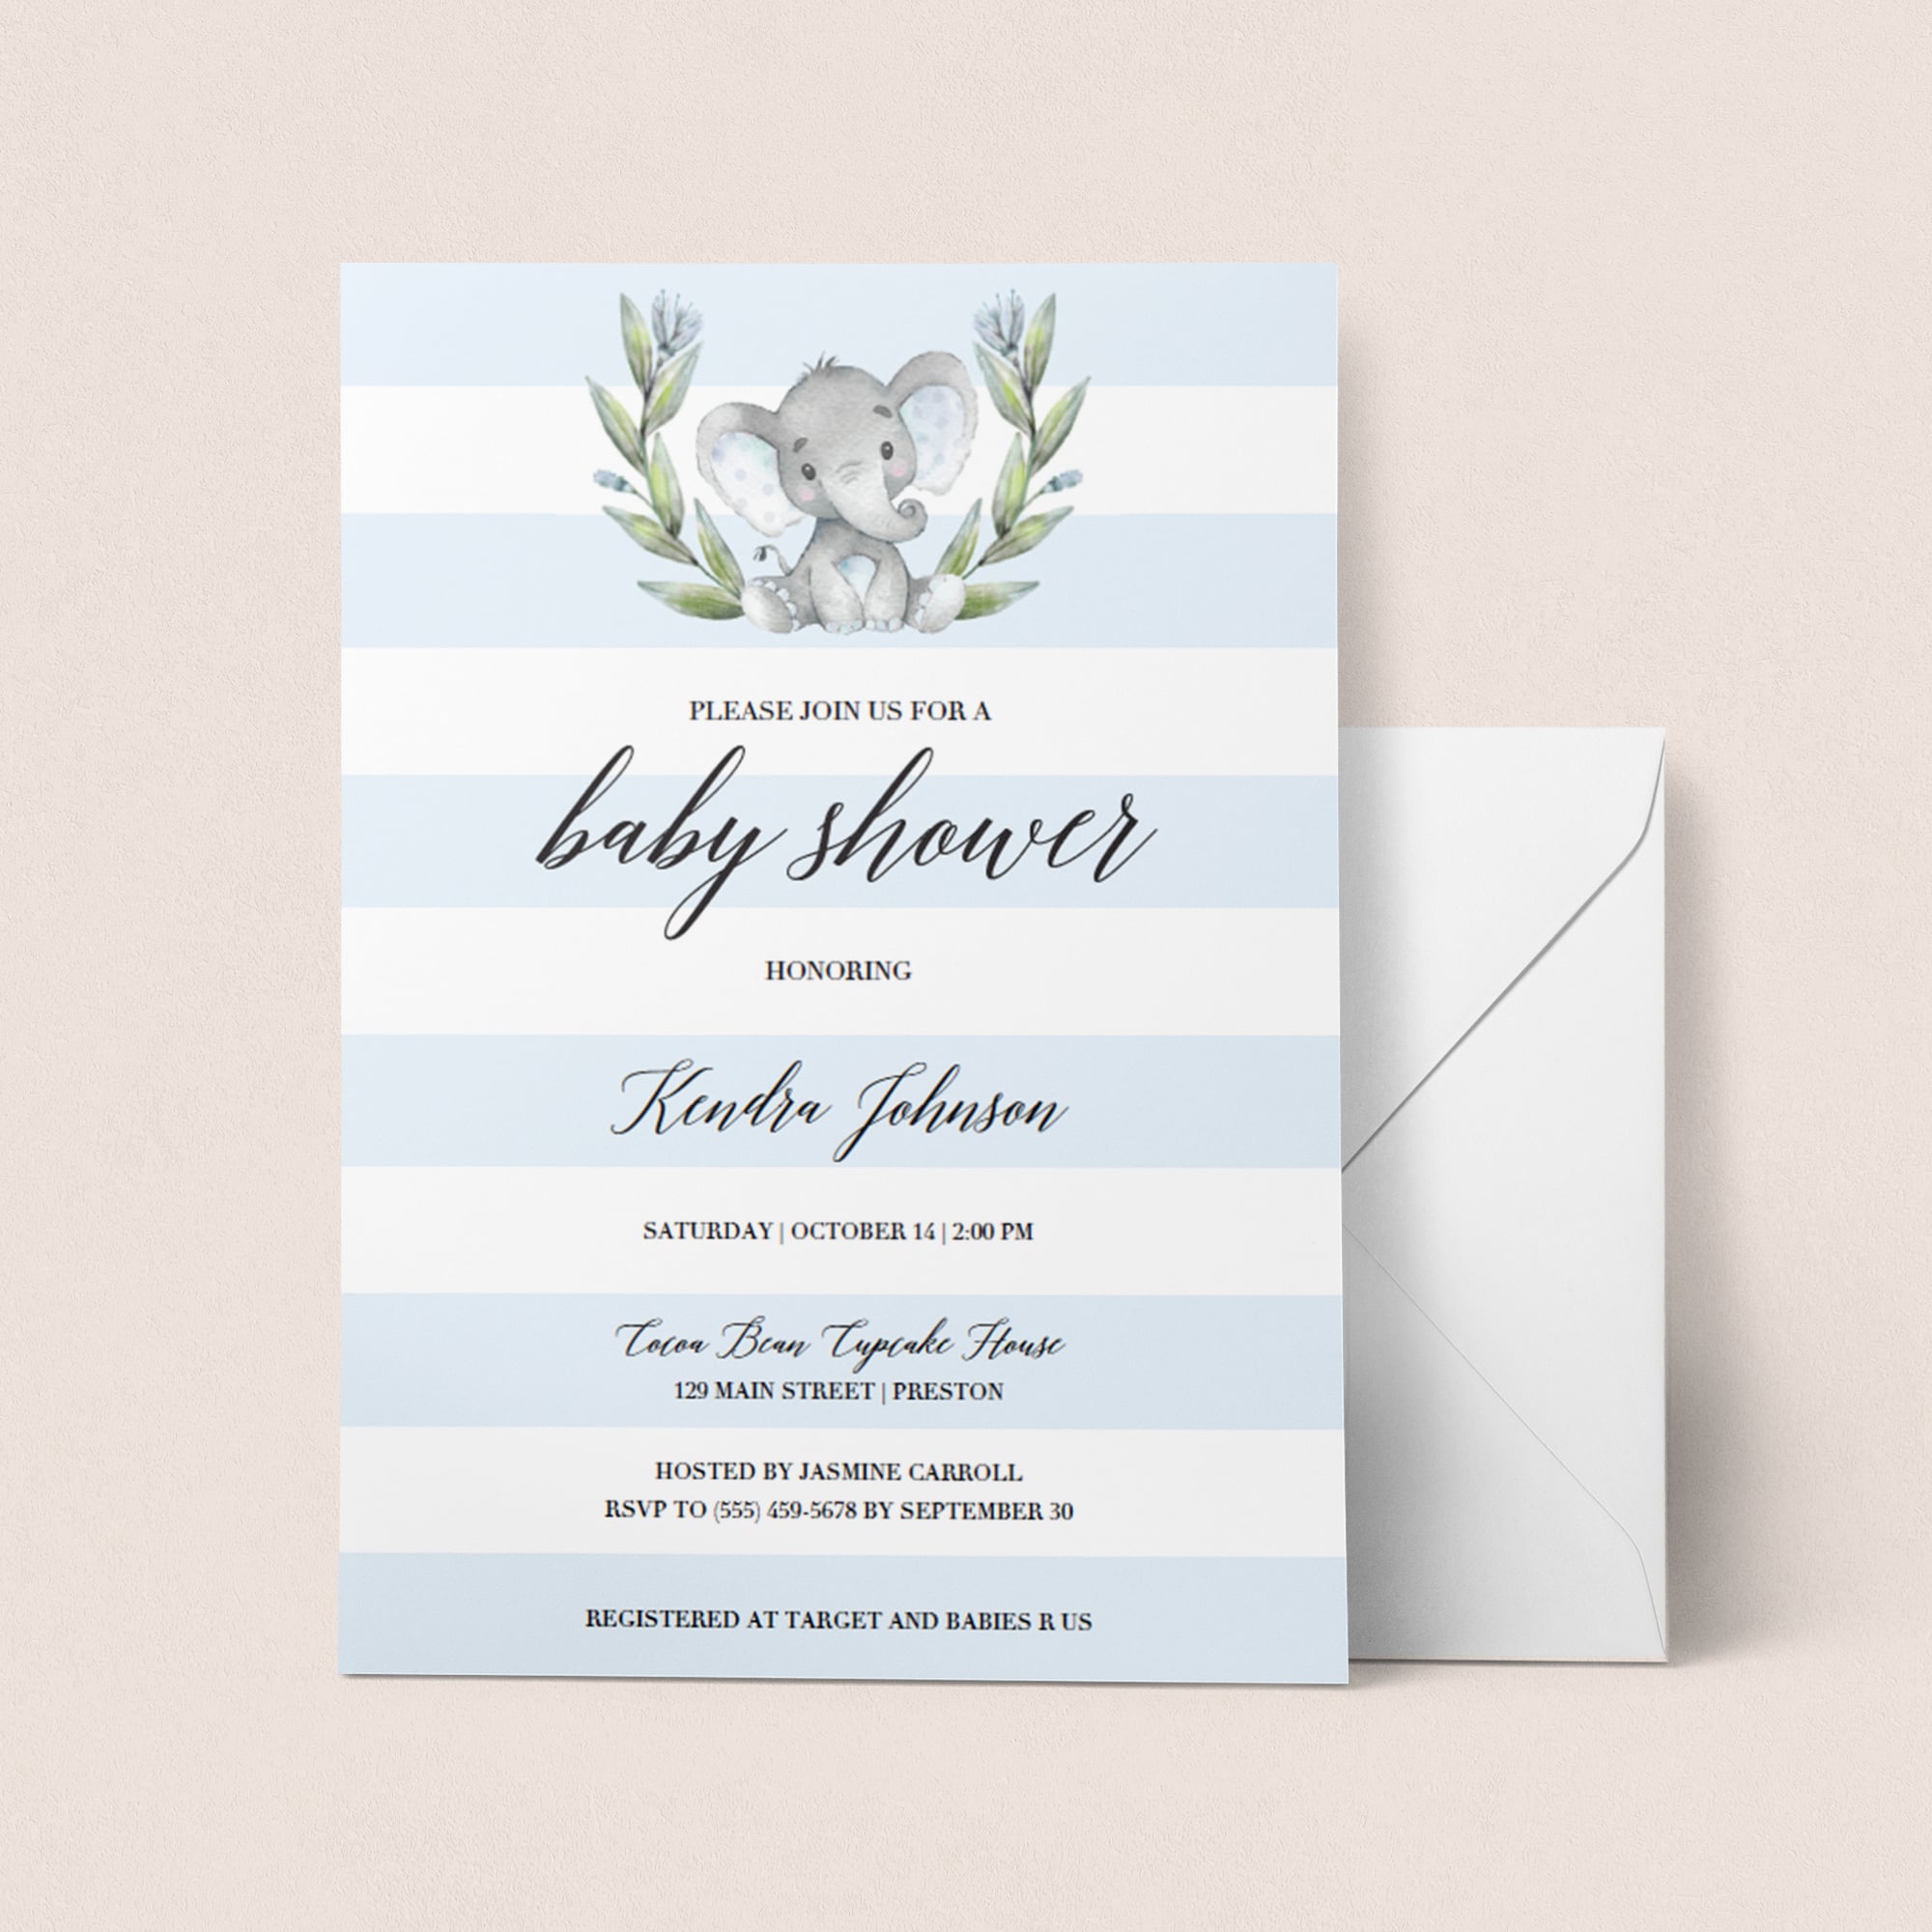 Elephant baby shower invite template by LittleSizzle